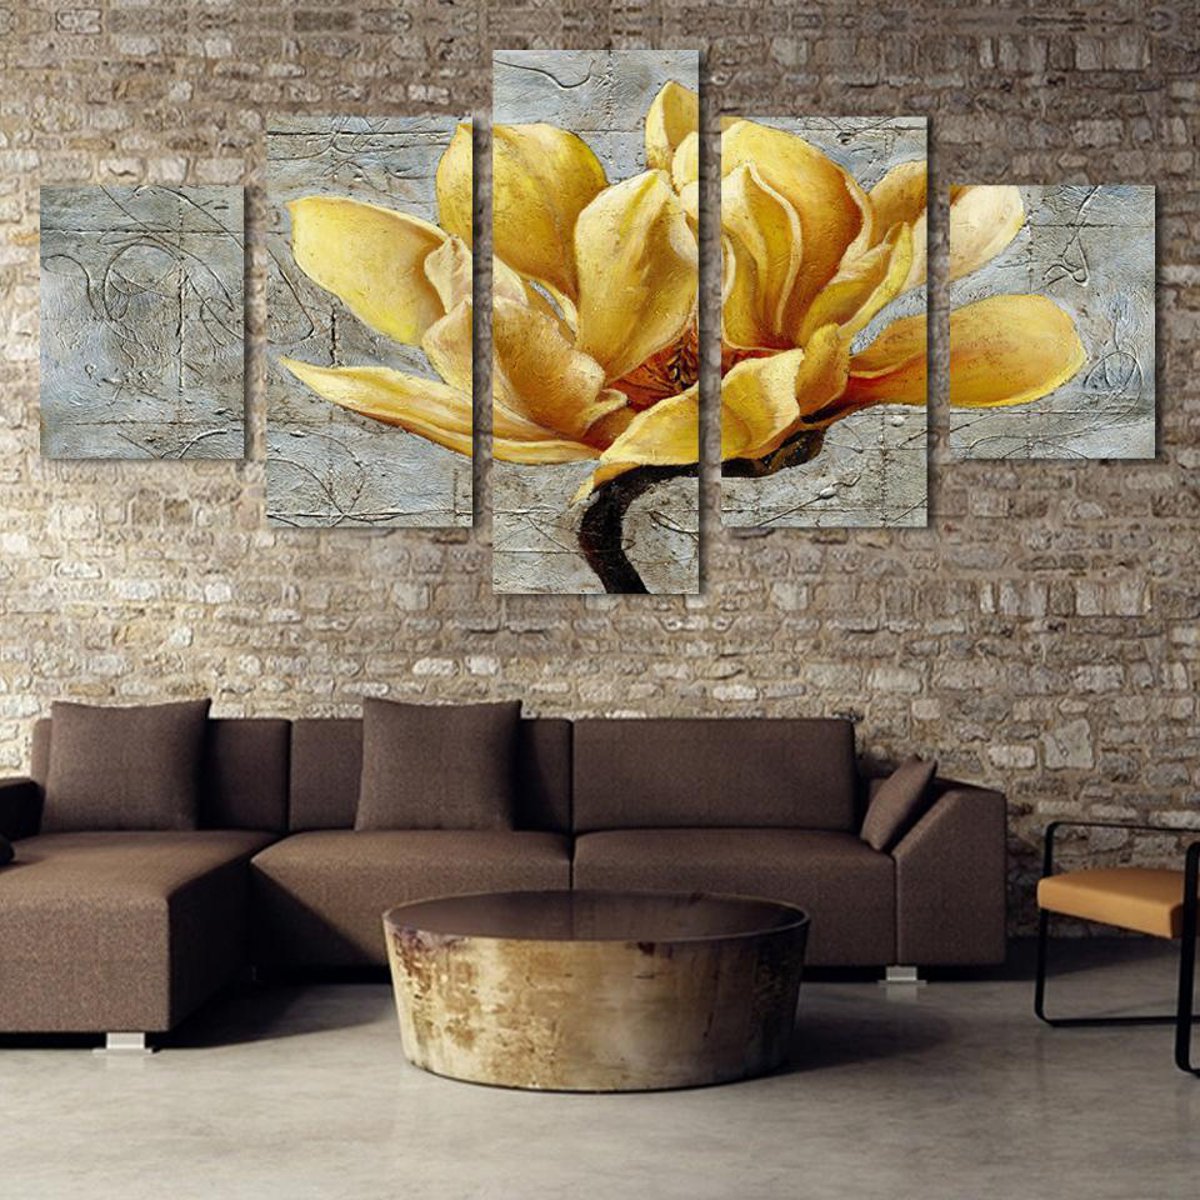 5Pcs Unframed Modern Art Oil Paintings Print Canvas Picture Home Wall Room Decor